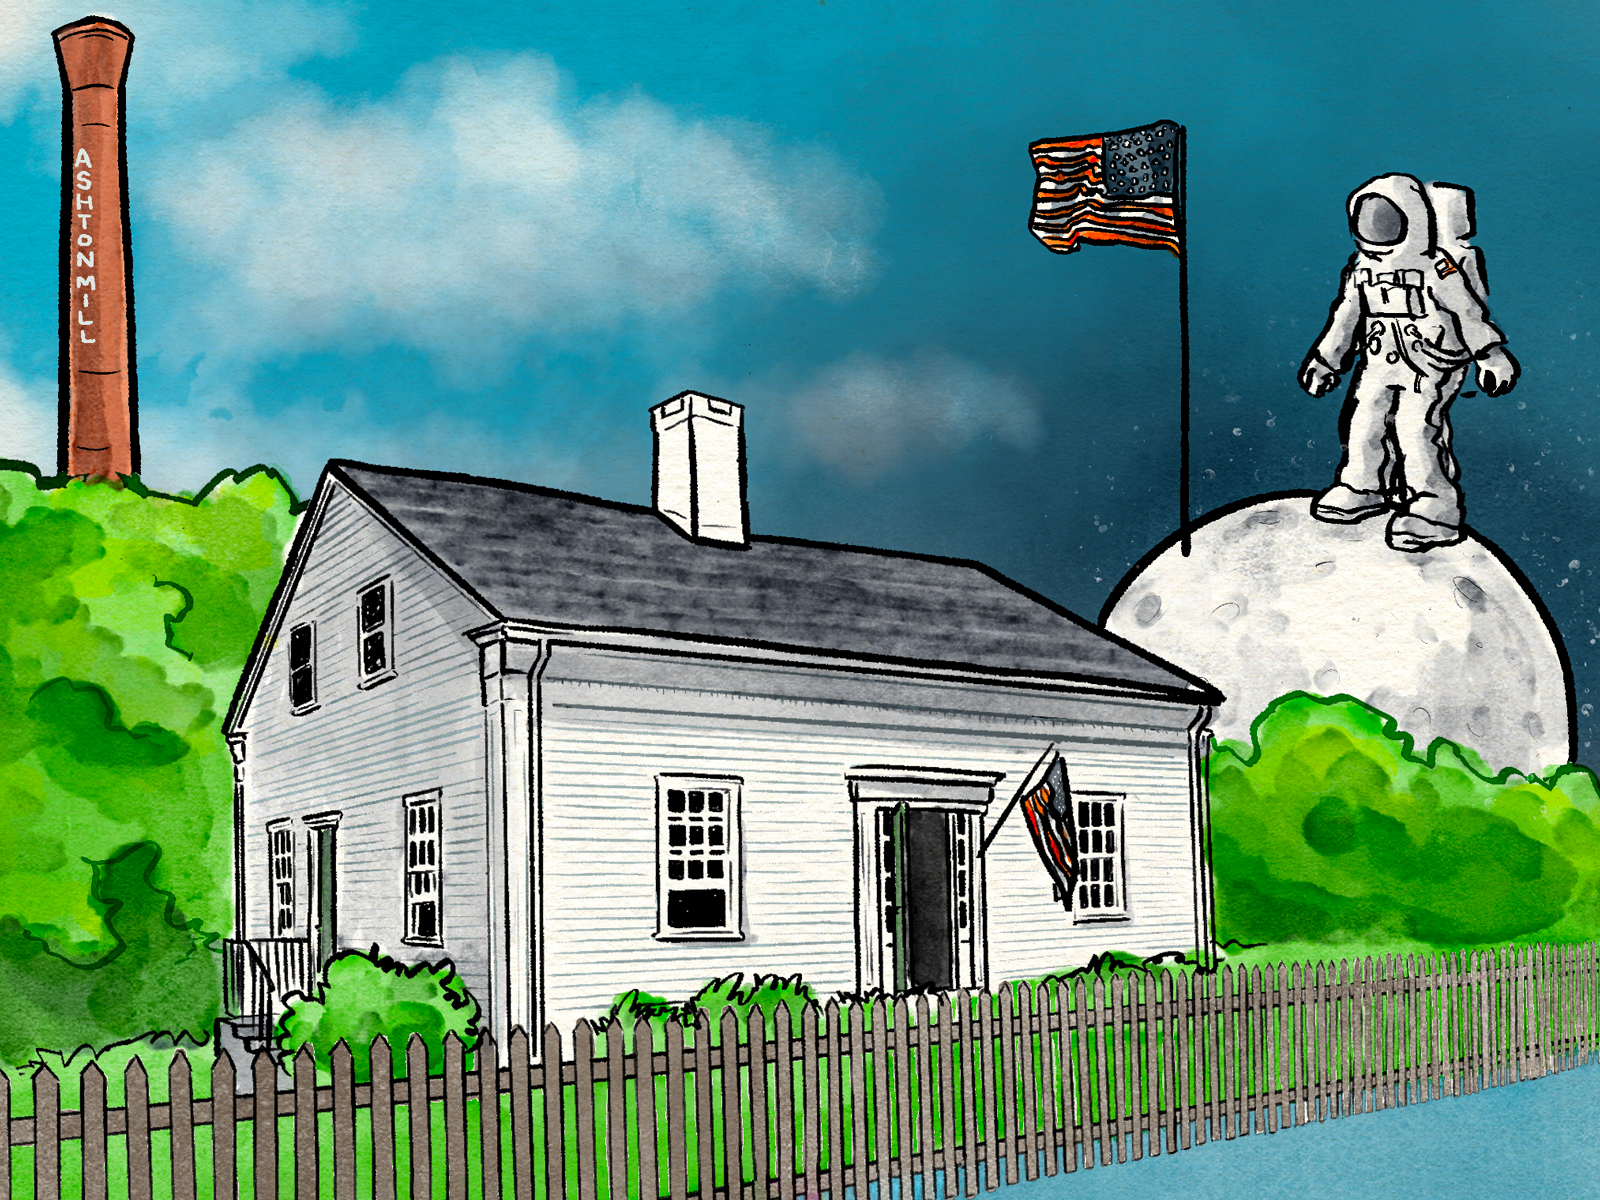 Stylized depiction of the Kelly House Transportation Museum the smokestack of the Ashton mill and an astronaut and American flag on the moon